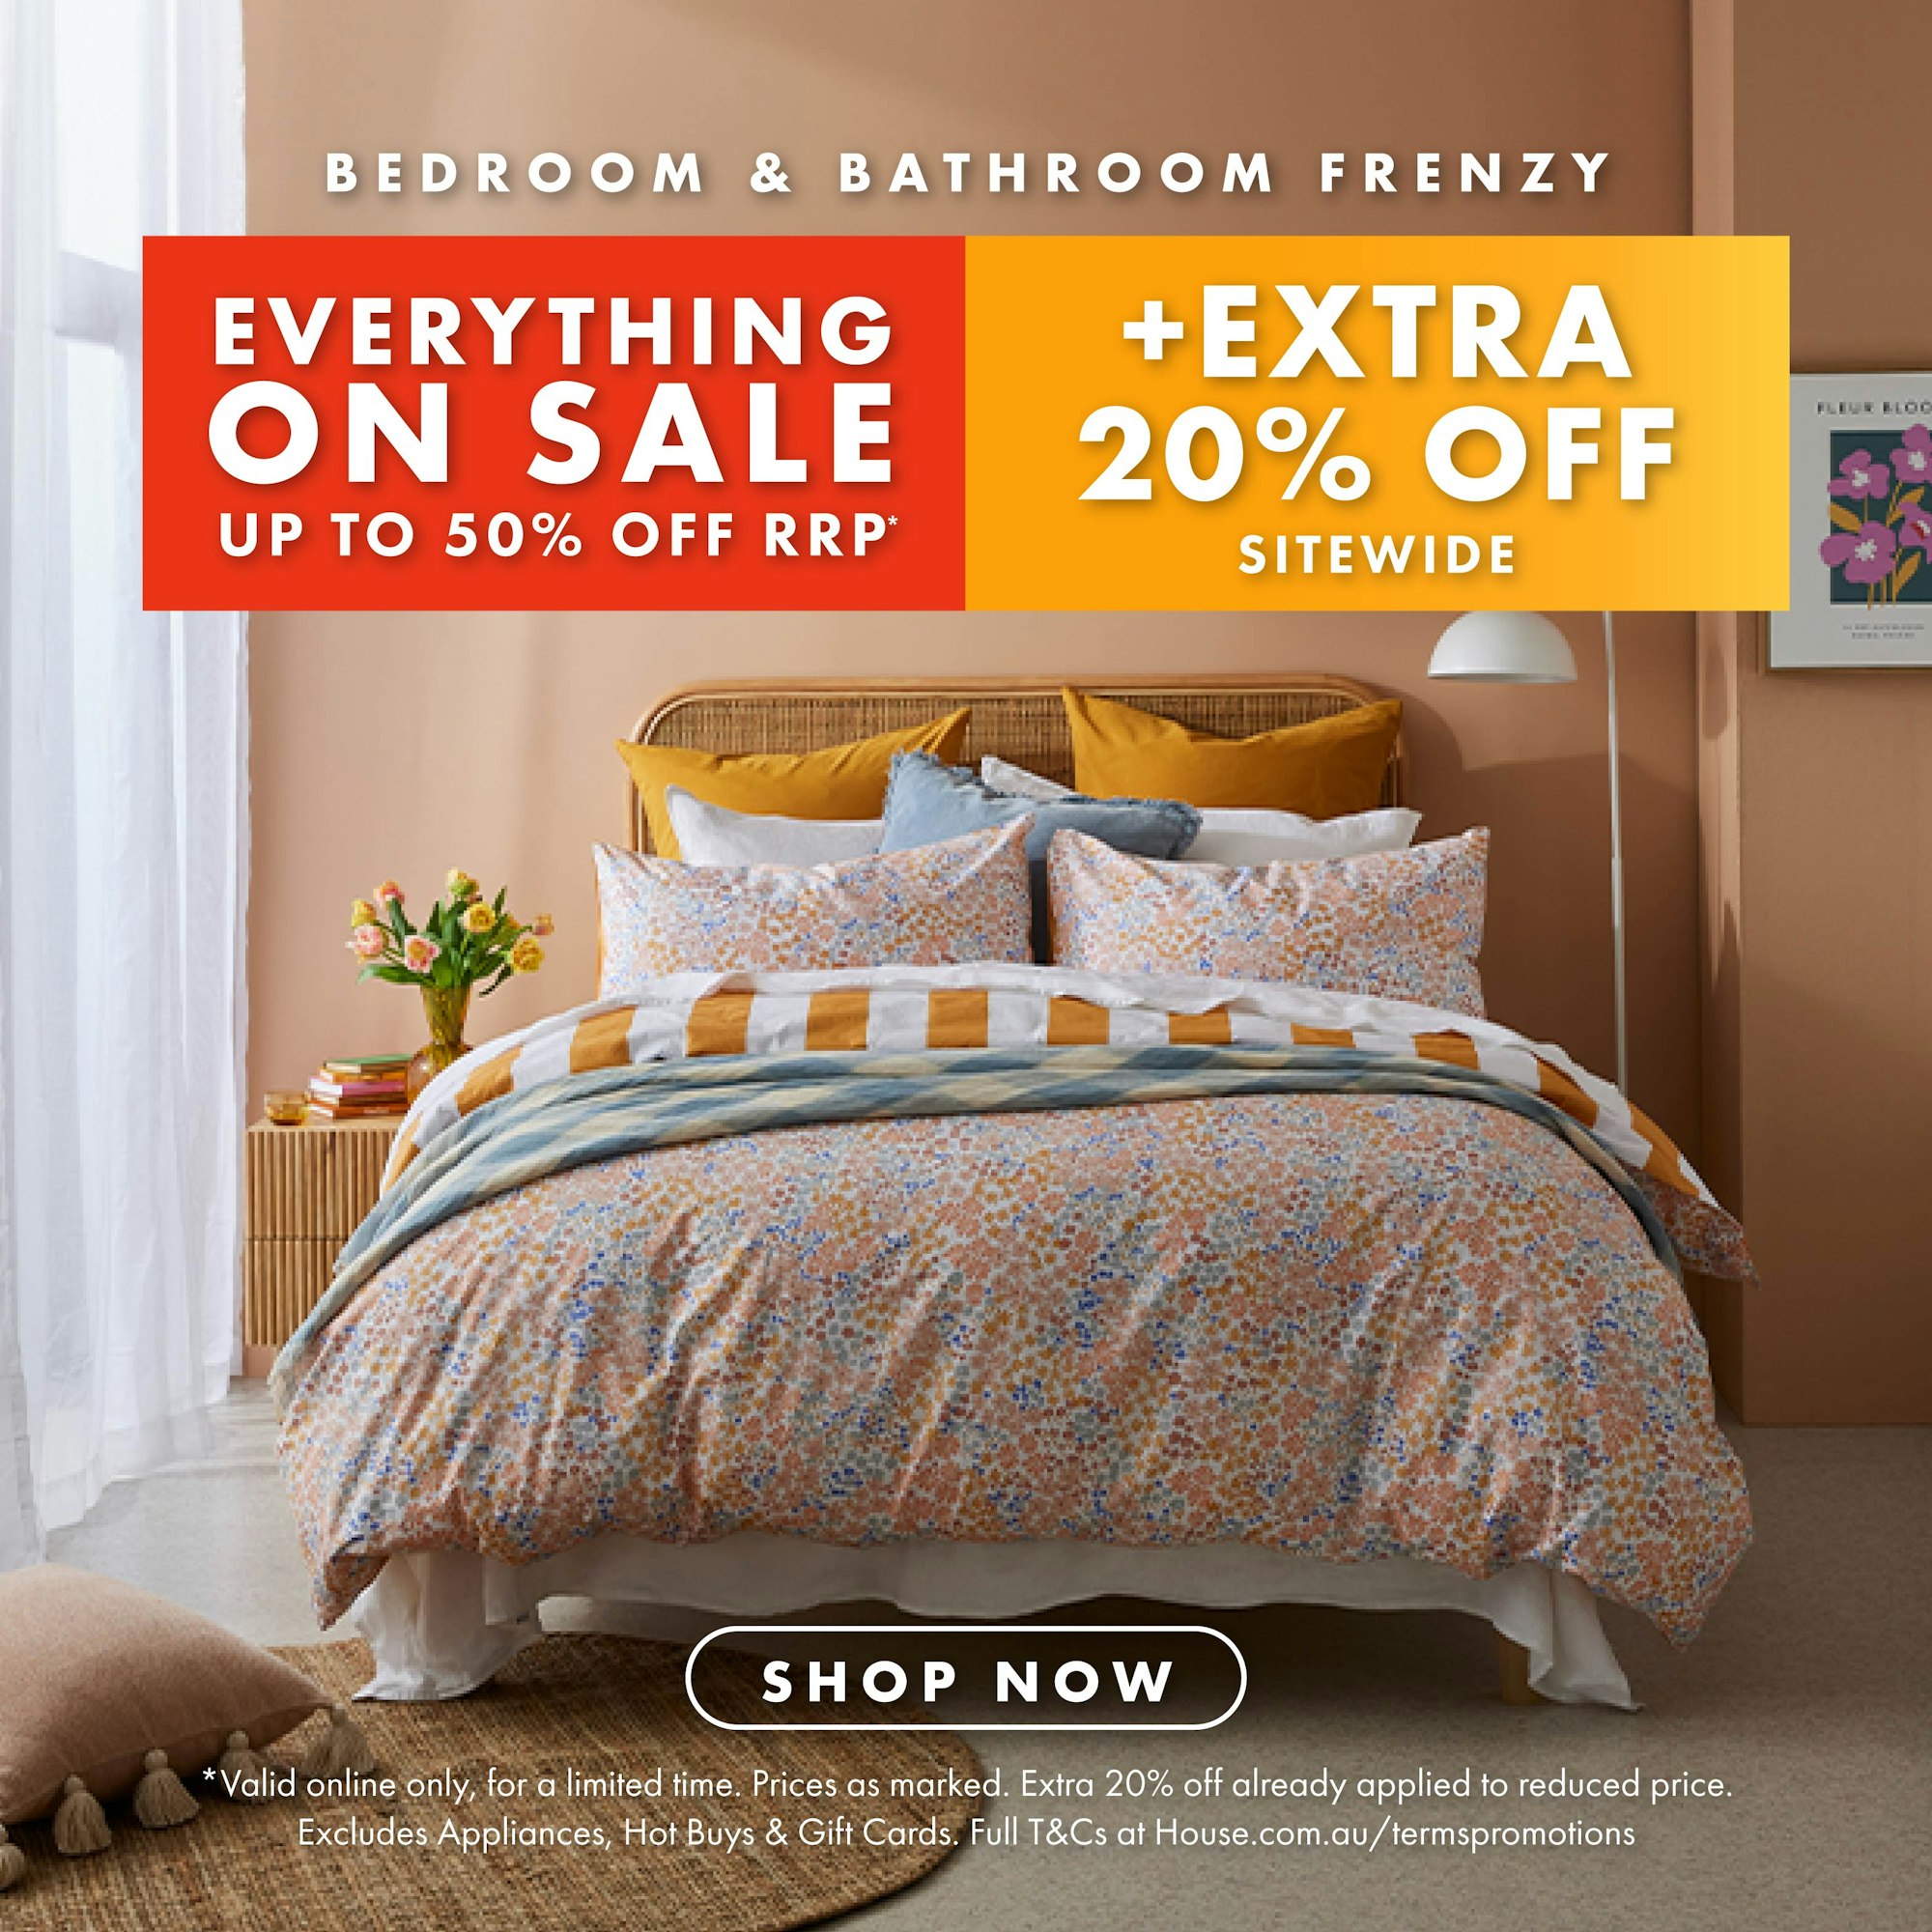 BED & BATH FRENZY EVERYTHING ON SALE + EXTRA 20% OFF